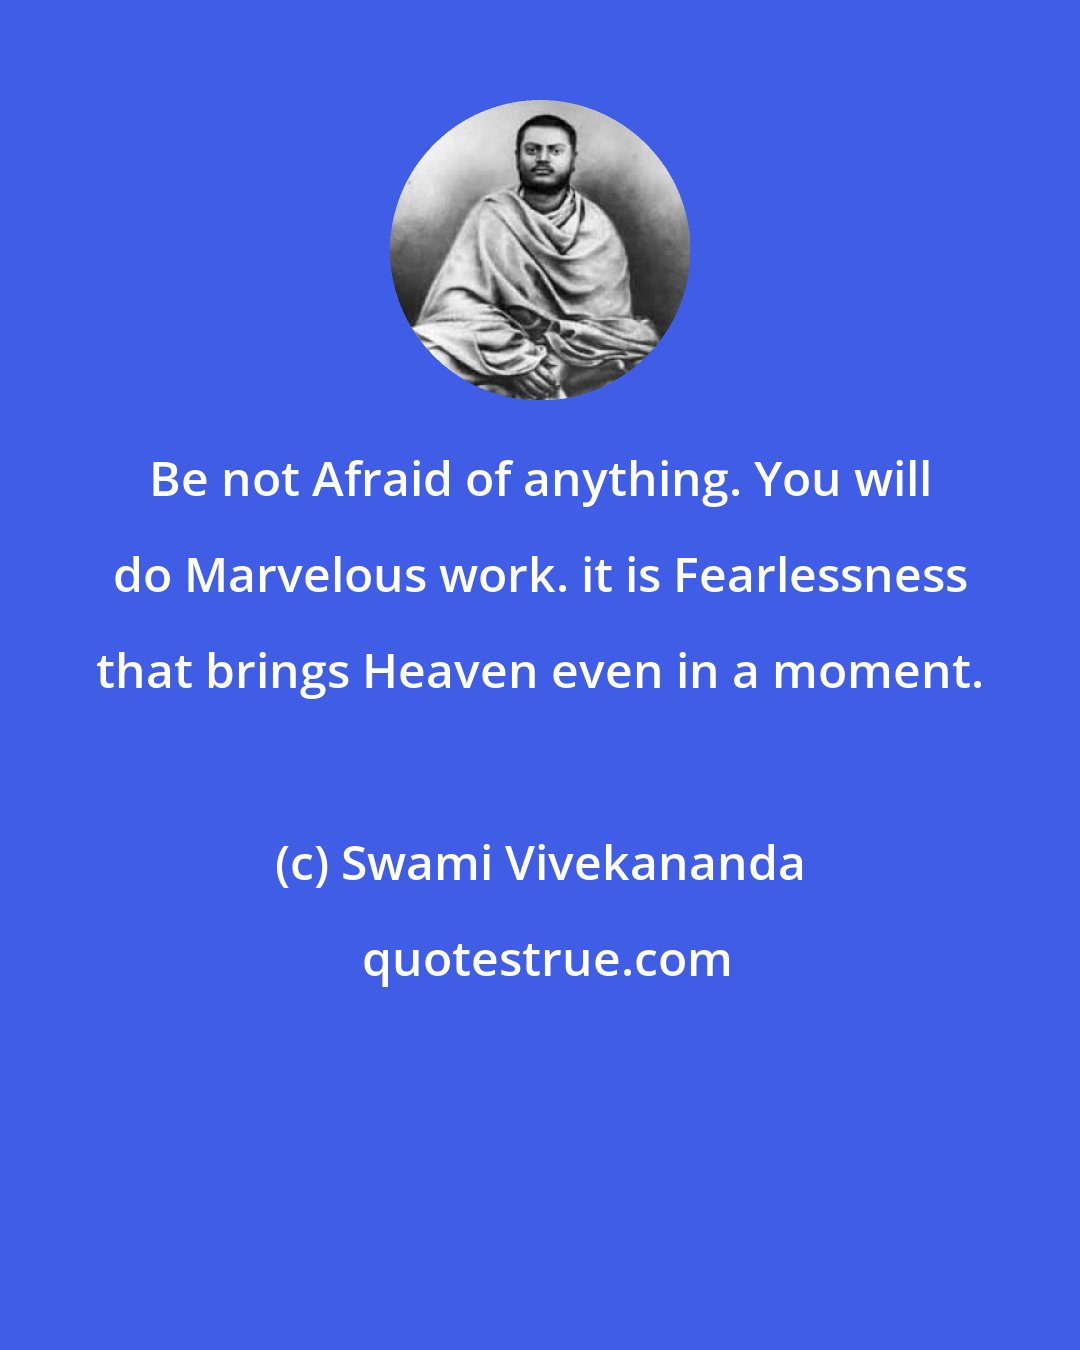 Swami Vivekananda: Be not Afraid of anything. You will do Marvelous work. it is Fearlessness that brings Heaven even in a moment.